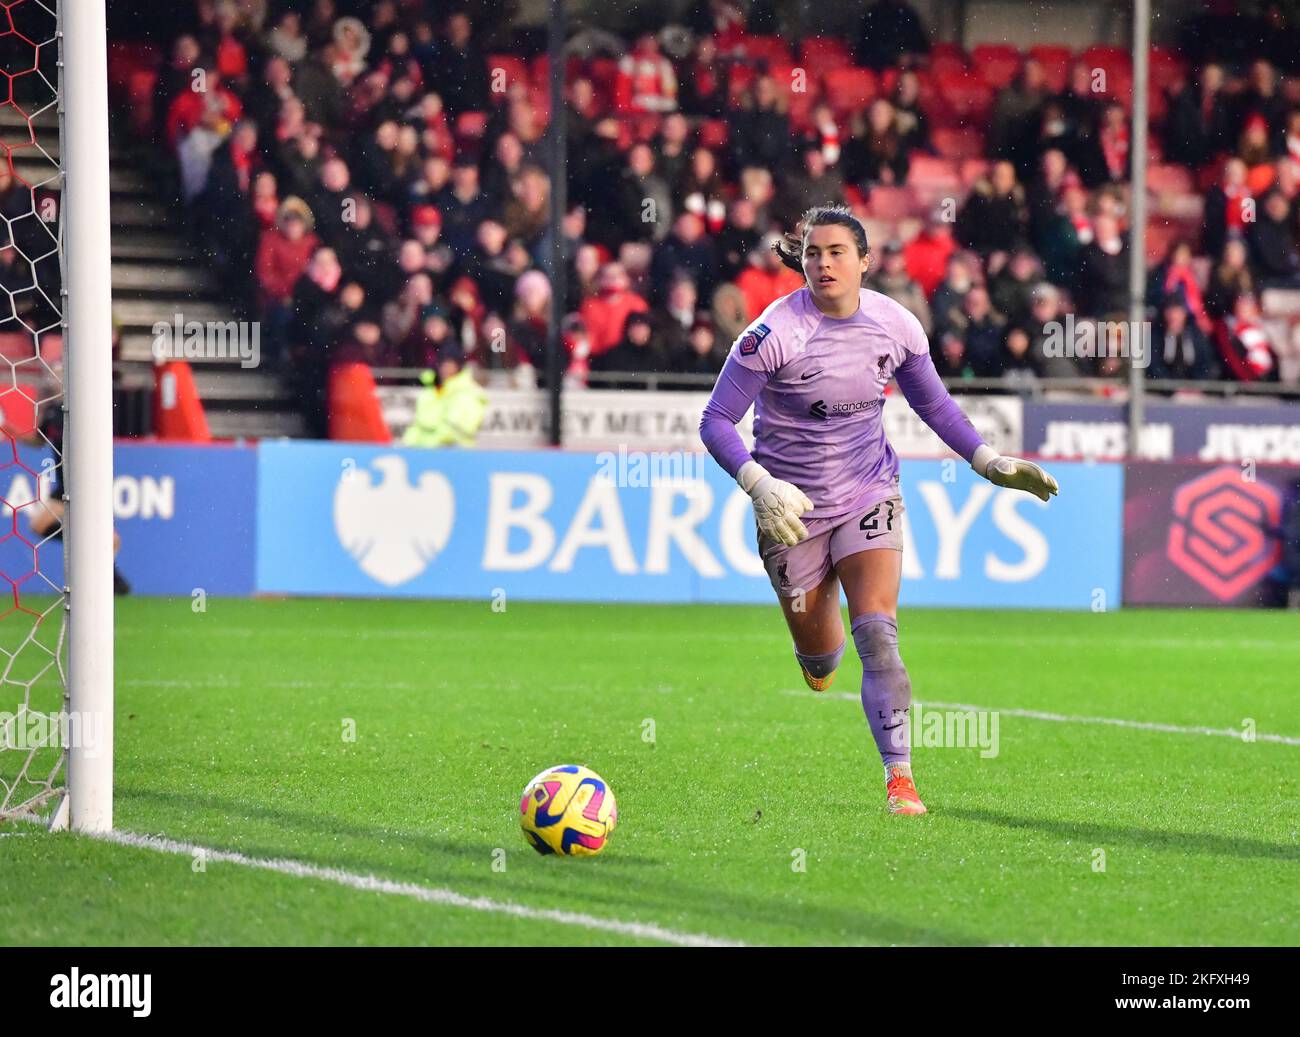 Crawley, UK. 20th Nov, 2022. Eartha Cumings Goalkeeper of Liverpool sees the ball go safely past her post during the FA Women's Super League match between Brighton & Hove Albion Women and Liverpool Women at The People's Pension Stadium on November 20th 2022 in Crawley, United Kingdom. (Photo by Jeff Mood/phcimages.com) Credit: PHC Images/Alamy Live News Stock Photo